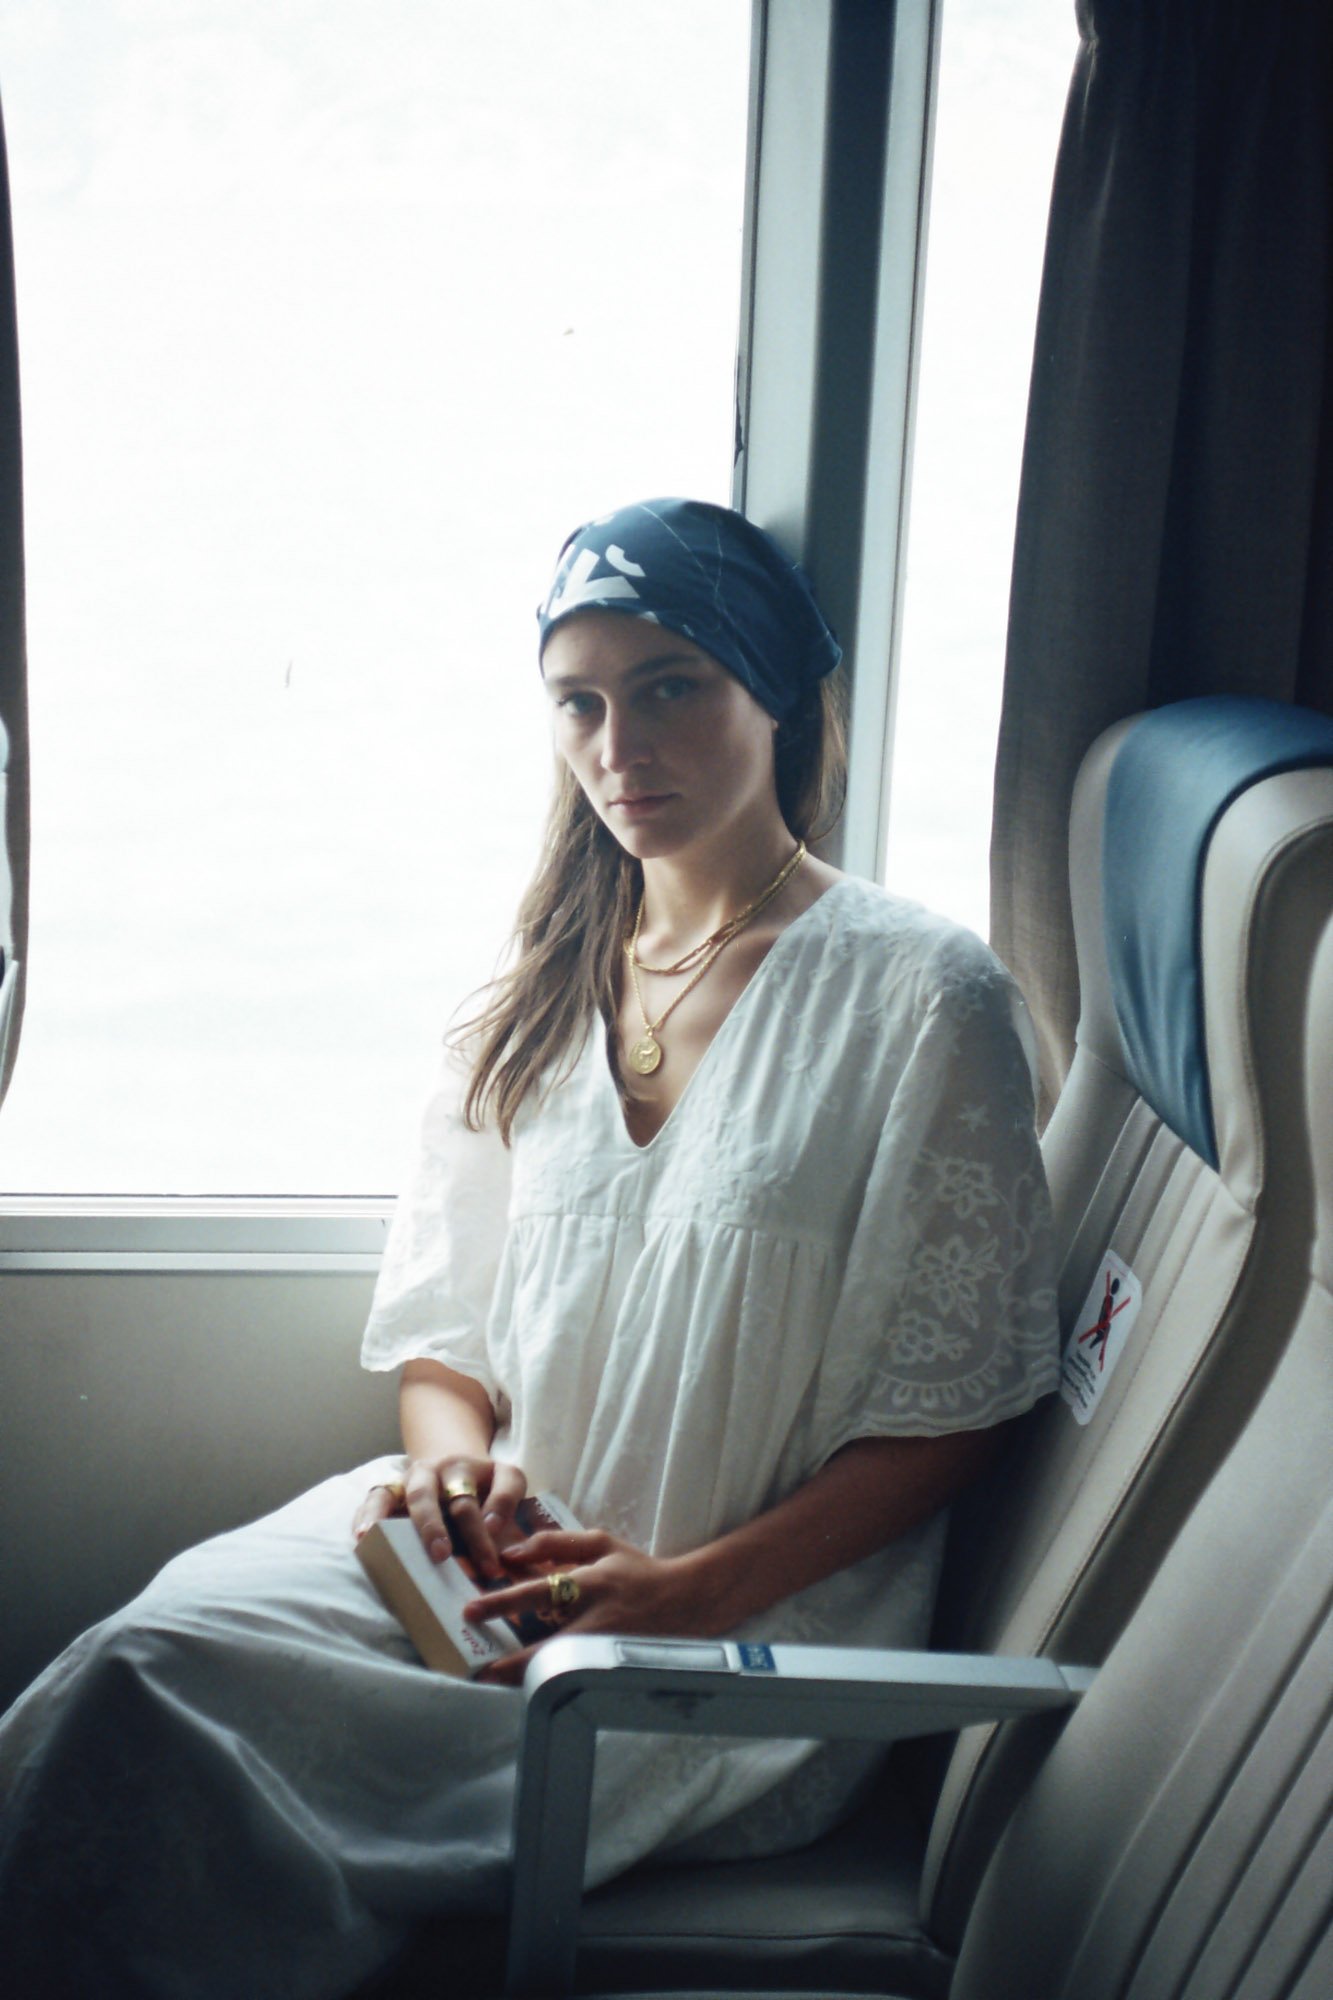 A woman wearing a white dress reading a book on a ferry boat seat